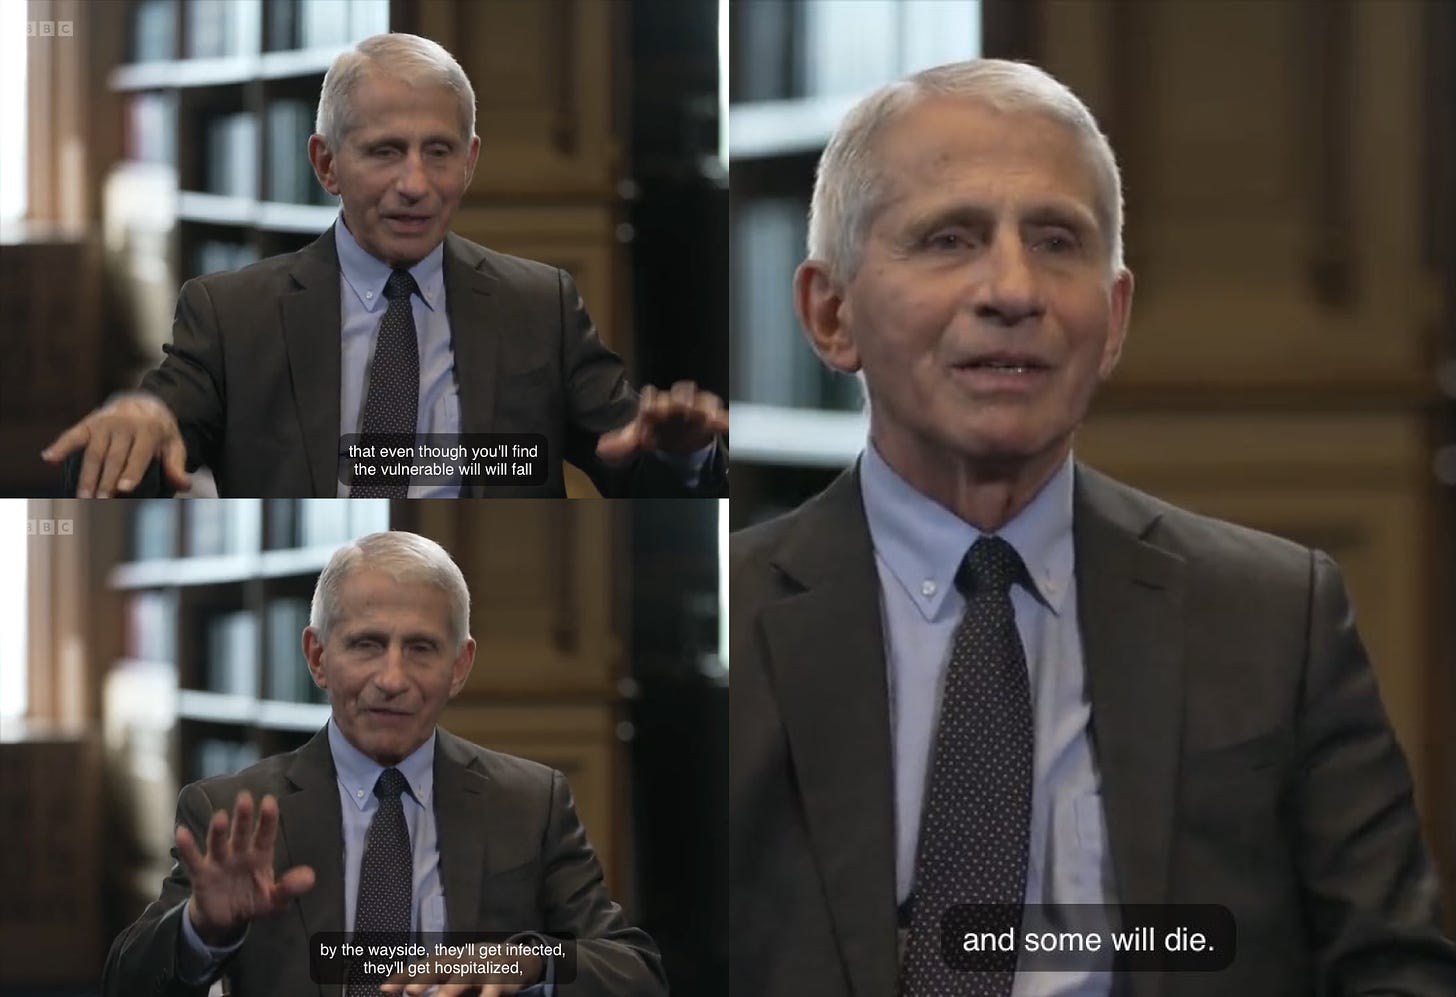 Anthony Fauci on BBC declaring "the vulnerable will fall by the wayside, get infected, hospitalized, and some will die."